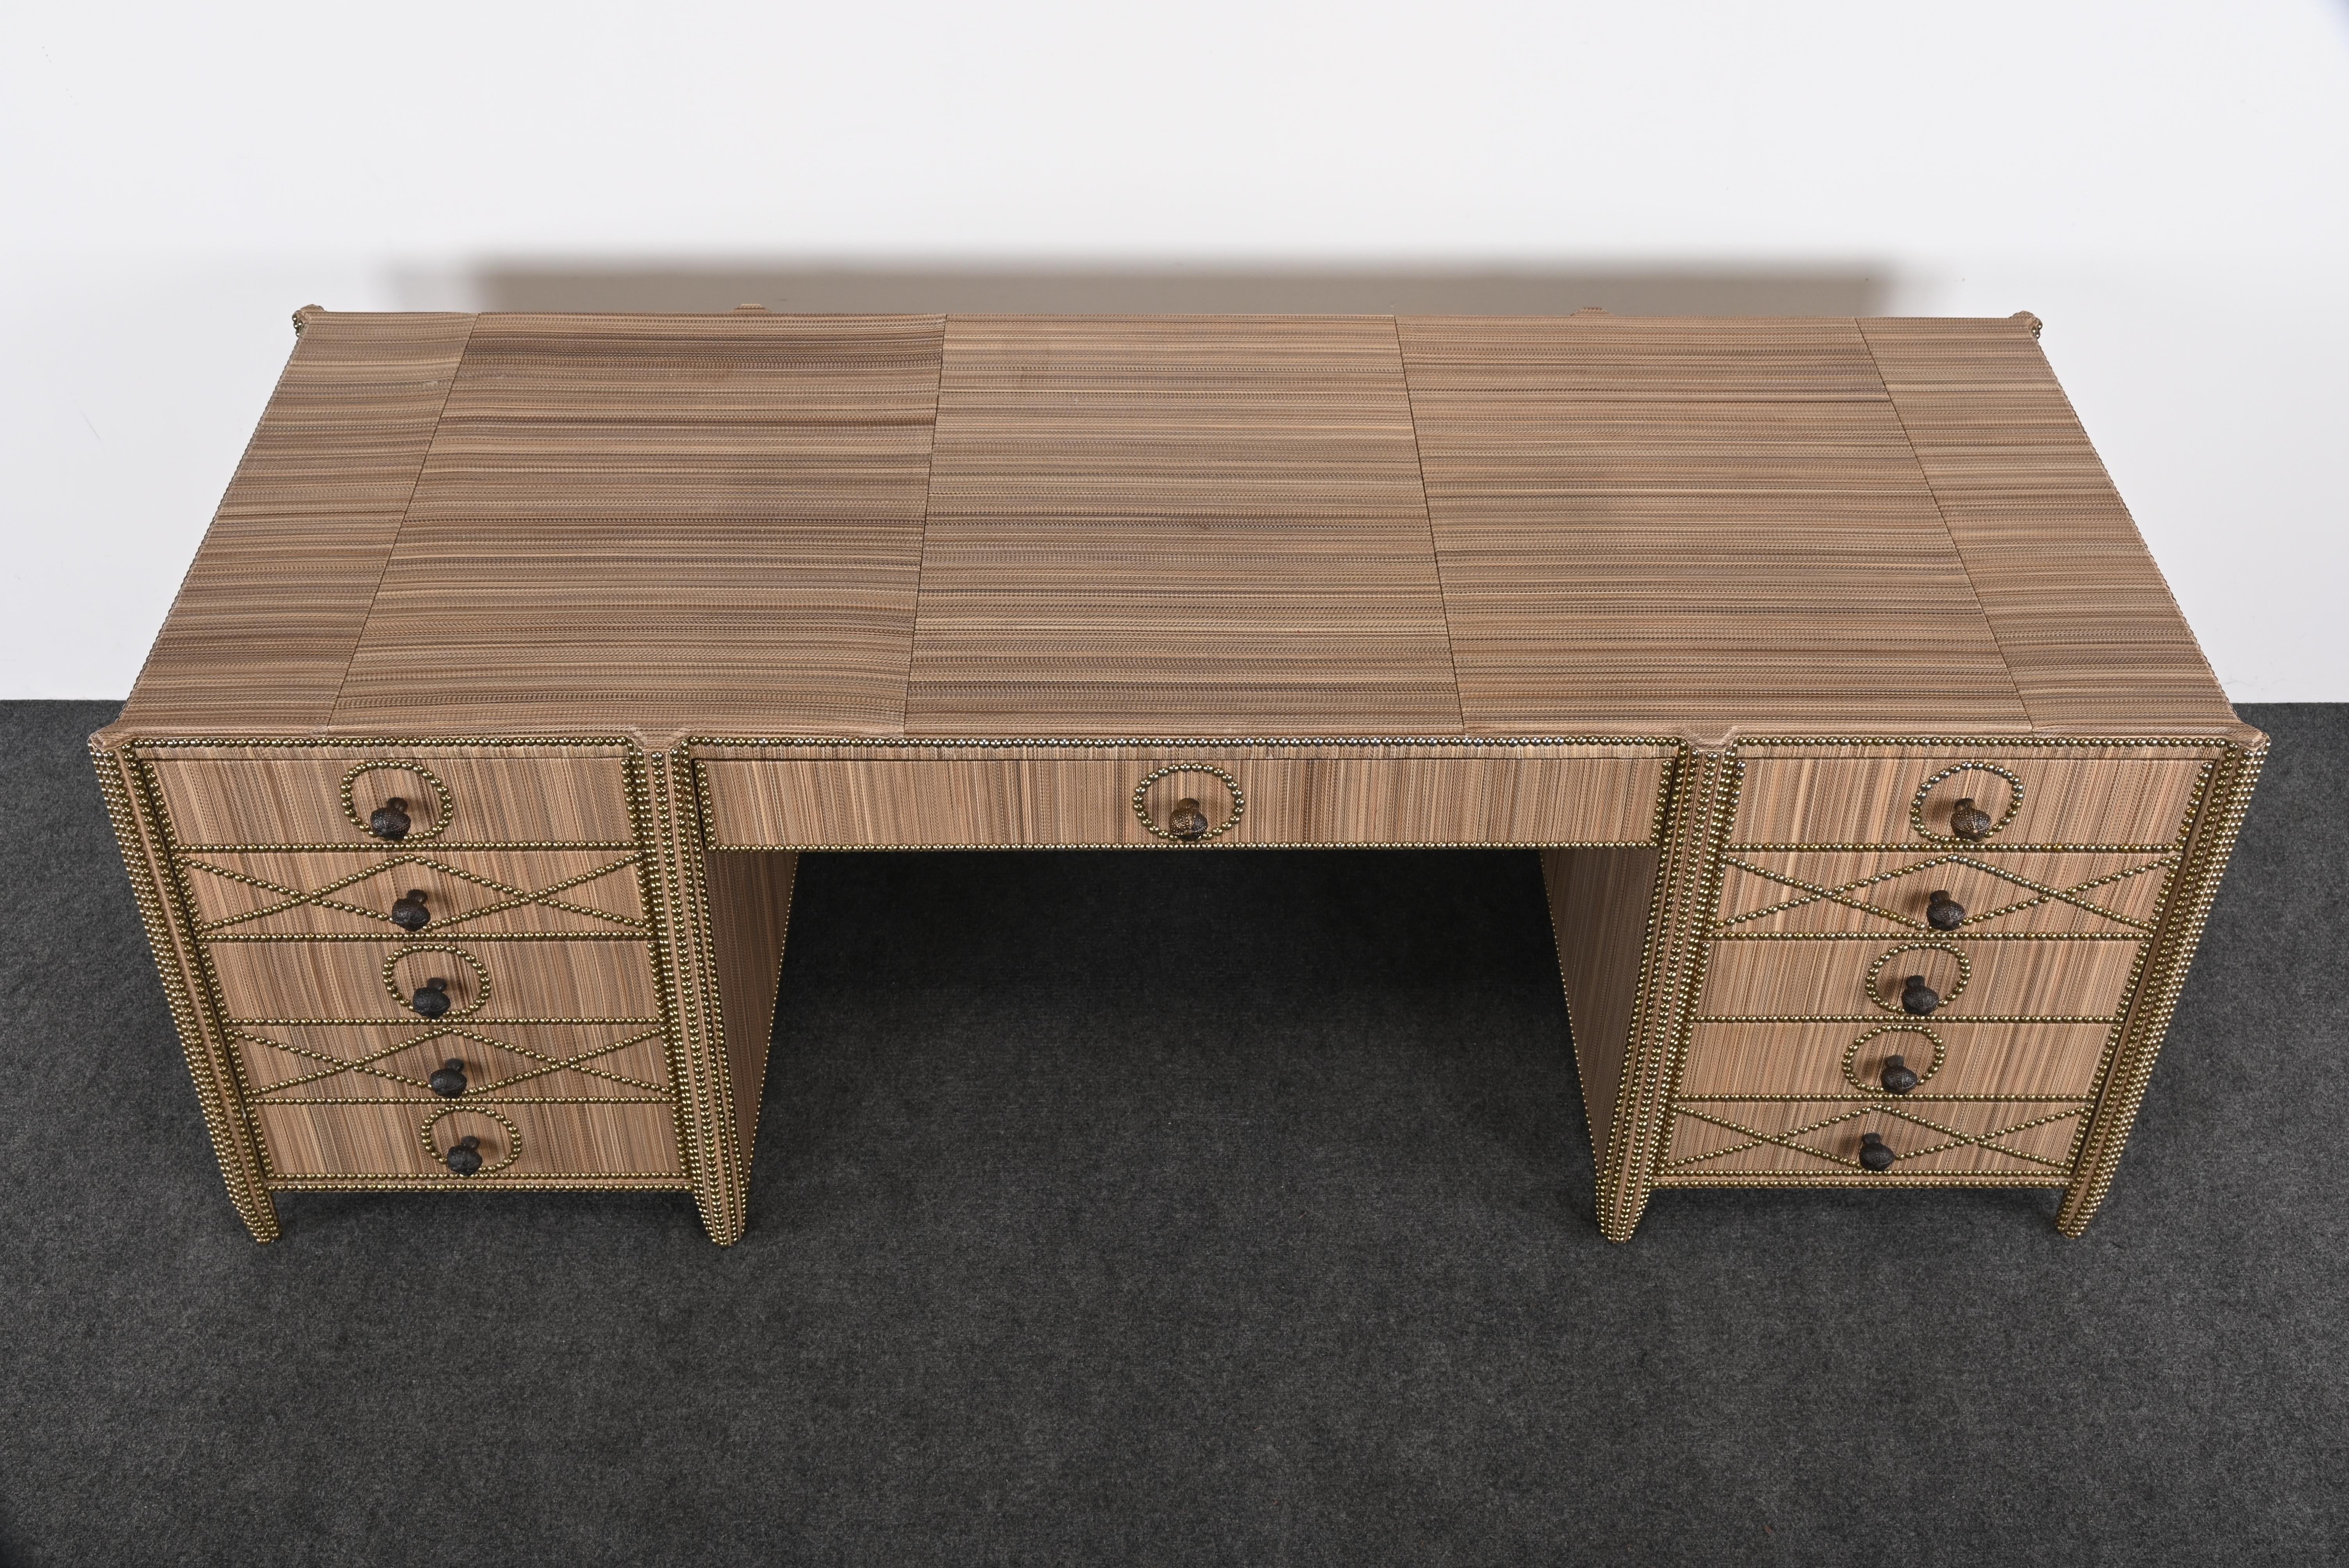 An important monumental Executive Desk from the beauty mogul, Sydell Miller, Palm Beach home and collection. Most of the fine art and avant-garde furniture and sculpture was originally sold at Christie's in New York. This luxurious desk is from the